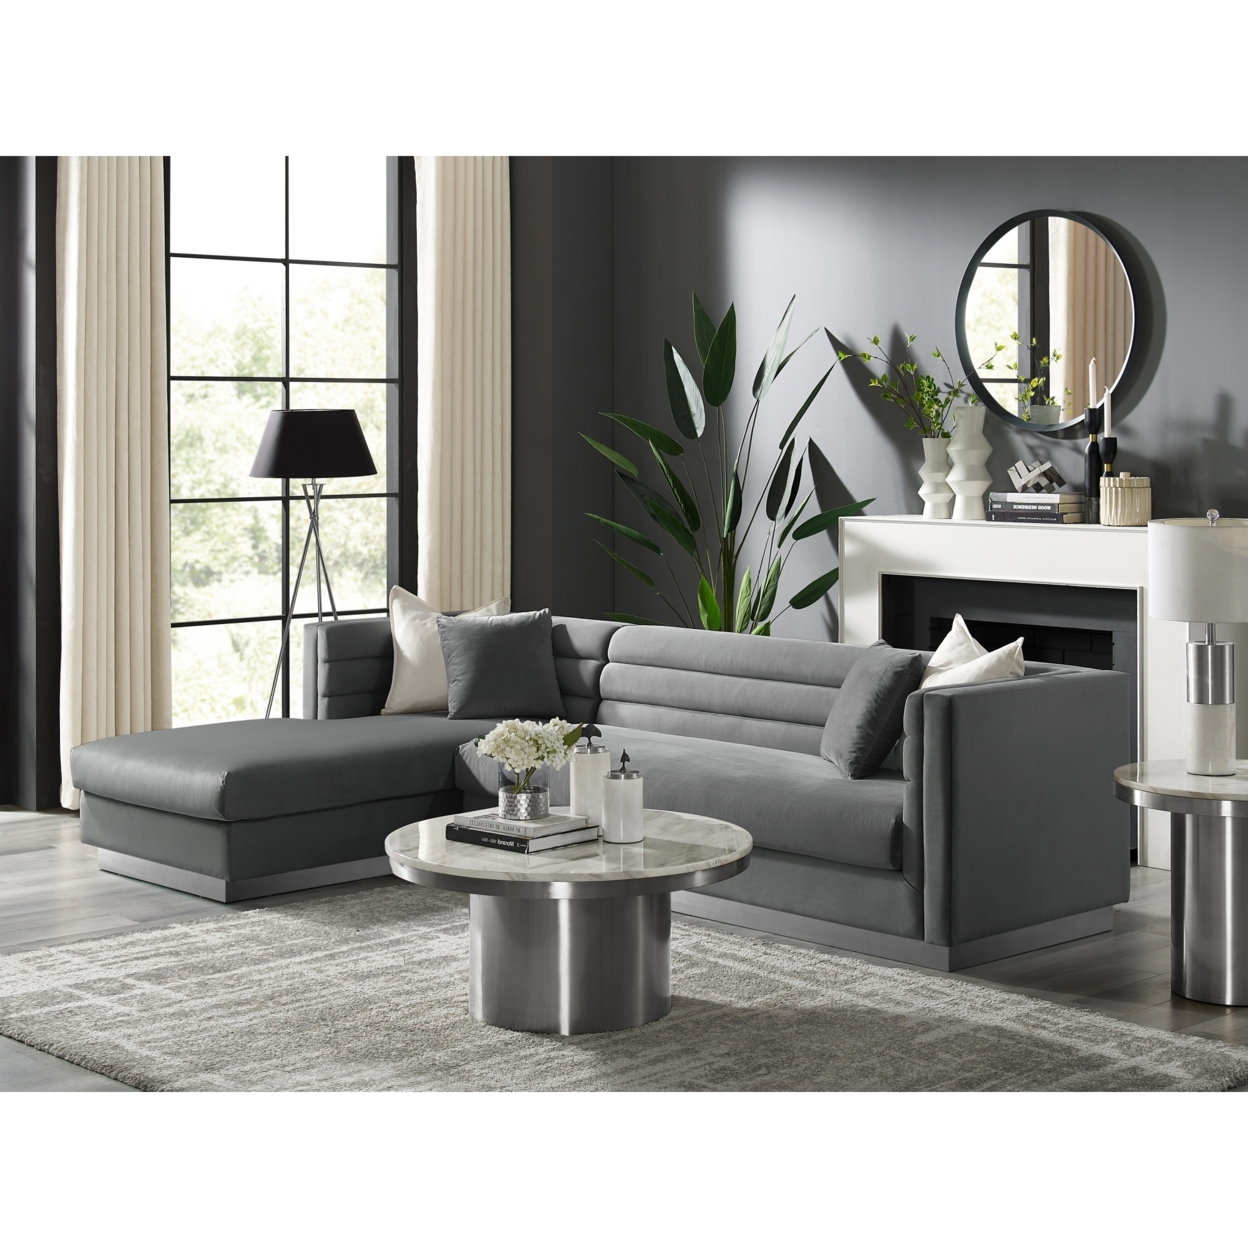 Aja Sofa-Upholstered-Sectional-Metal Base, Square Arms-Horizontal Channel Tufting - Hunter Green